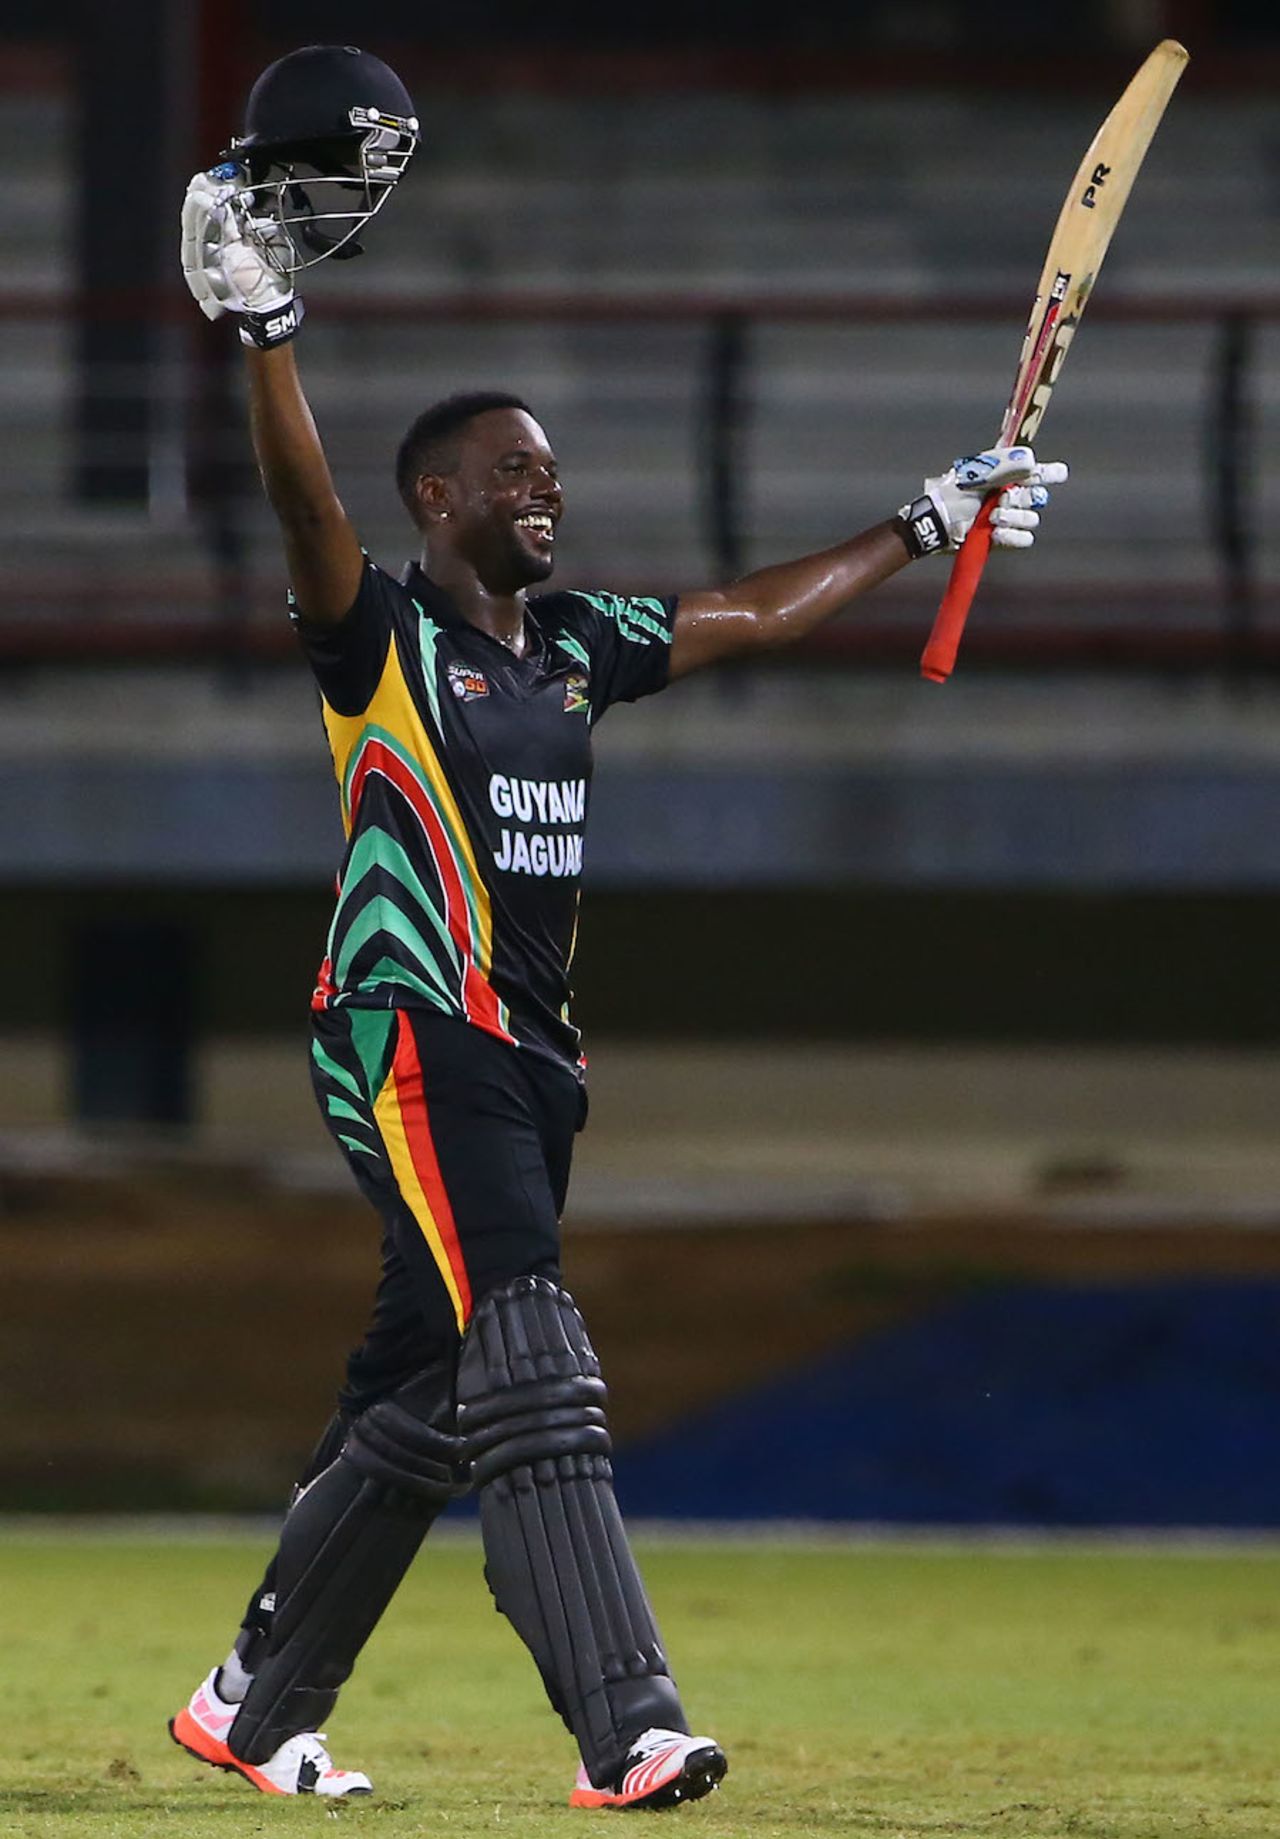 Raymon Reifer is all smiles after the win, Barbados v Guyana, Nagico Super50 2015, Port of Spain, January 17, 2015